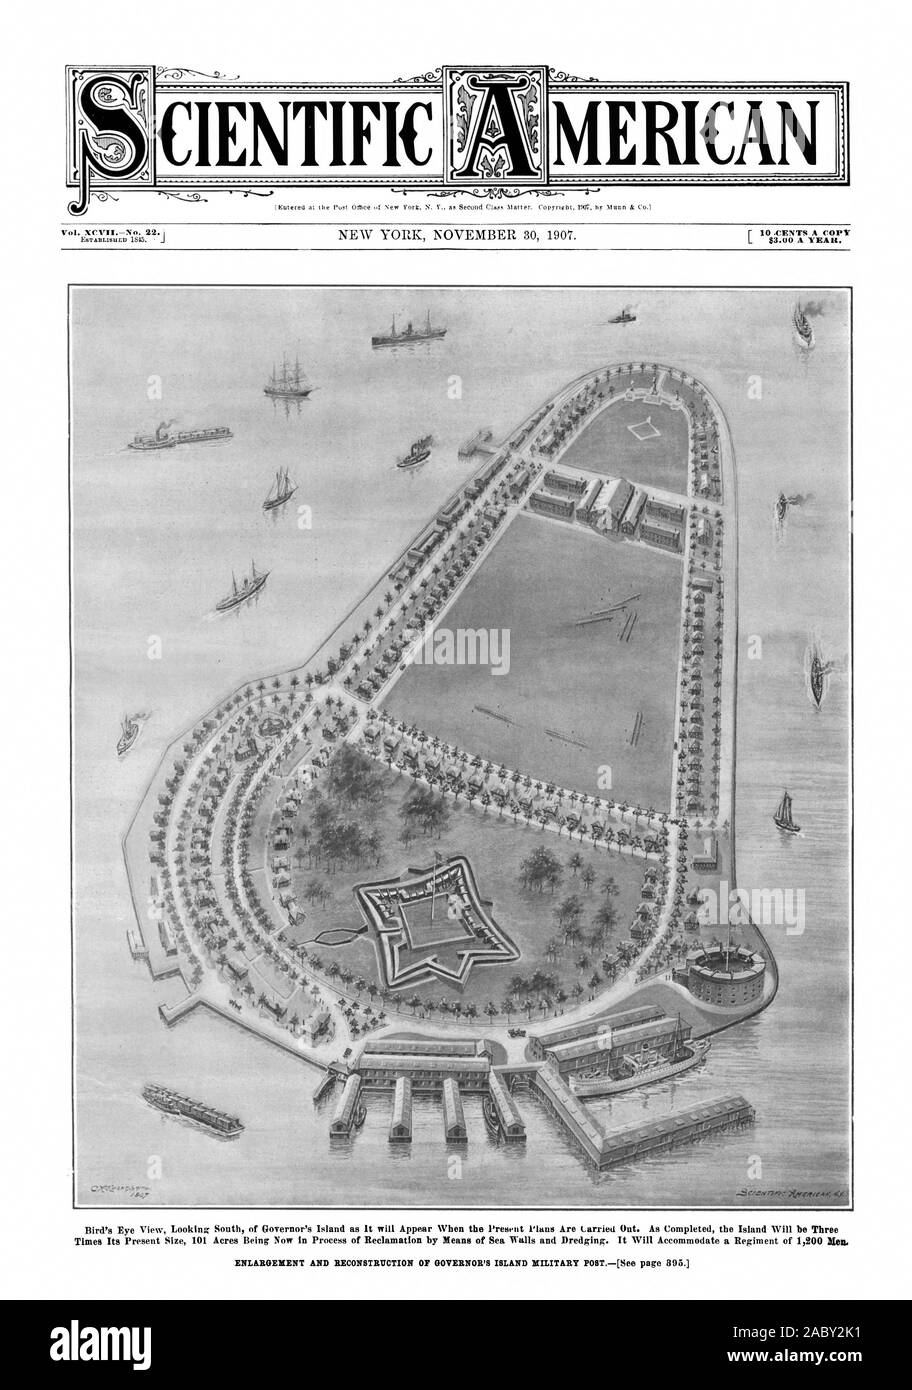 Kutered at the Pust Olice of New York N'. Y as Second Class Matter. Copyright EXIT by Munn d: Co.1 Vol. XCVIINo. 22. i, scientific american, 1907-11-30, enlargement and reconstruction of Governor's Island Military Post Stock Photo